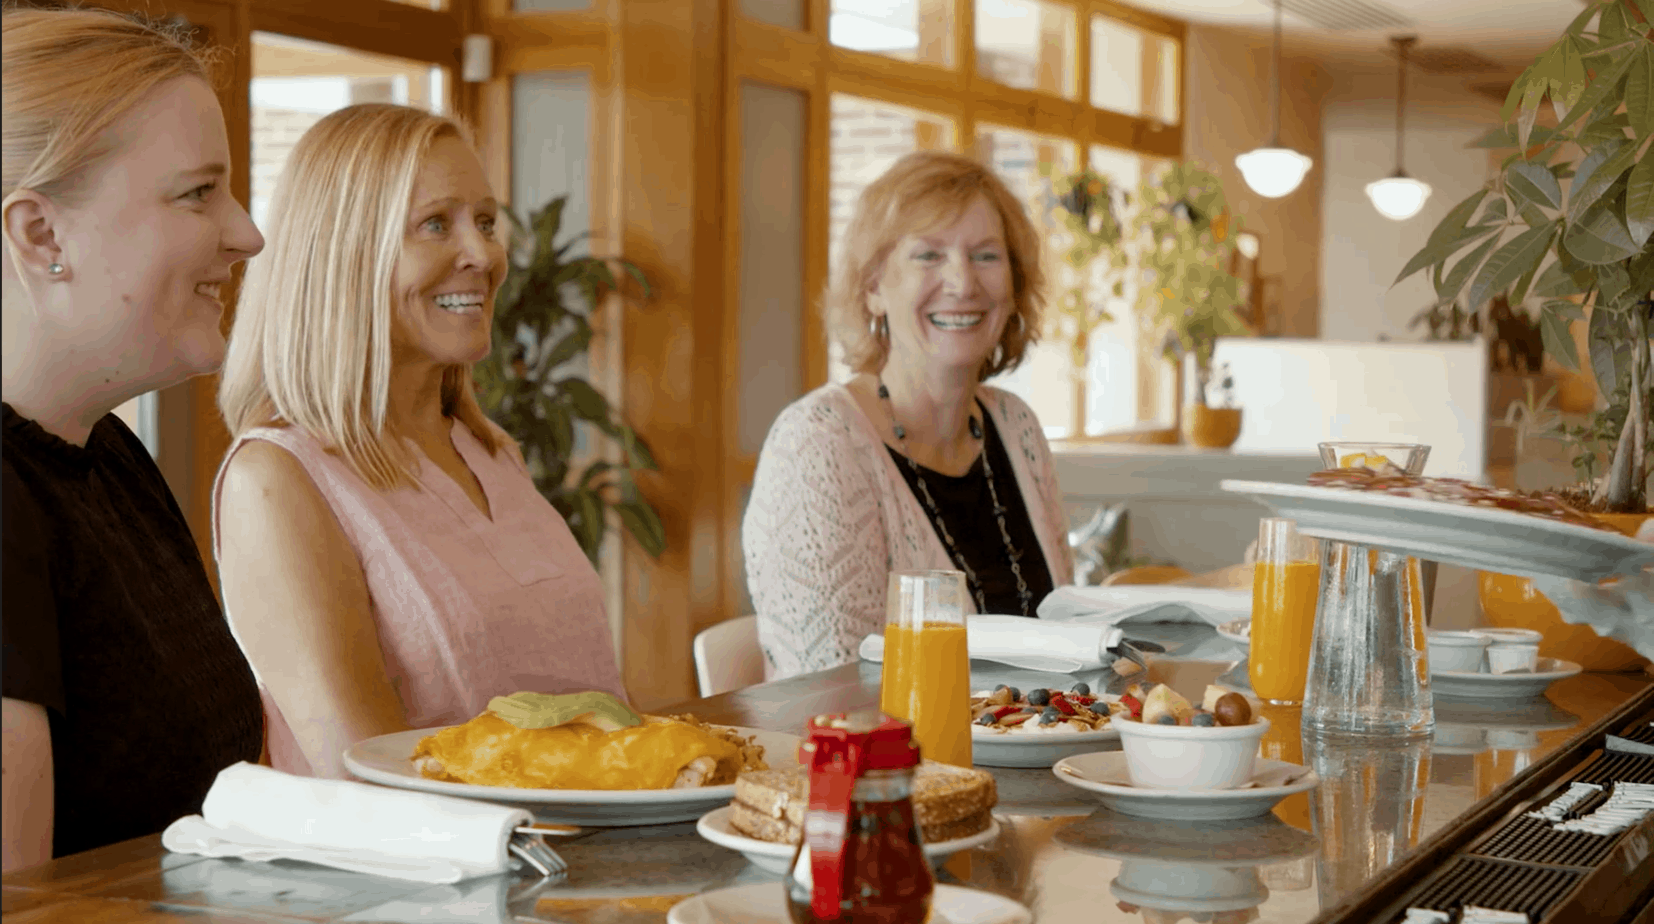 3 Women smiling at something off-camera with plates of food in front of them